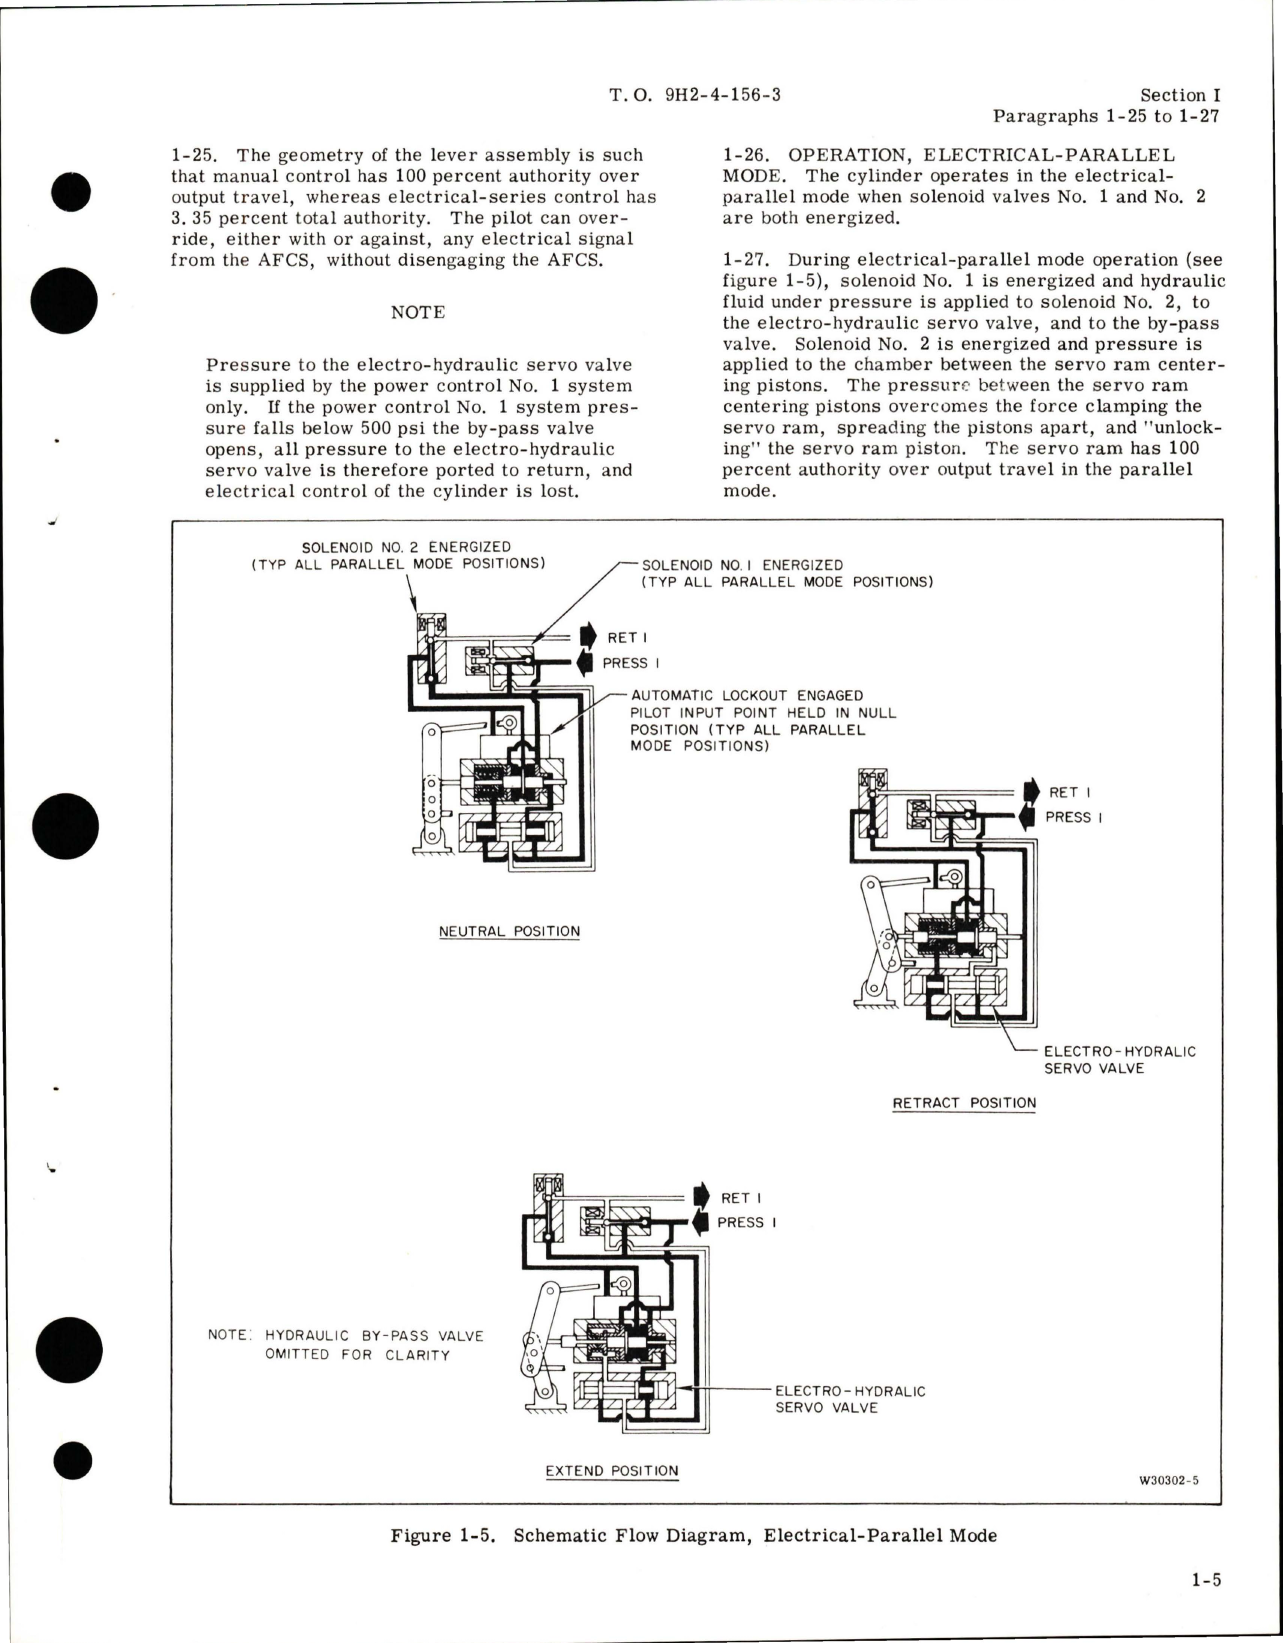 Sample page 9 from AirCorps Library document: Overhaul Instructions for Electro-Hydraulic Tandem Power Control Cylinder - Part 22930 and 22930-1